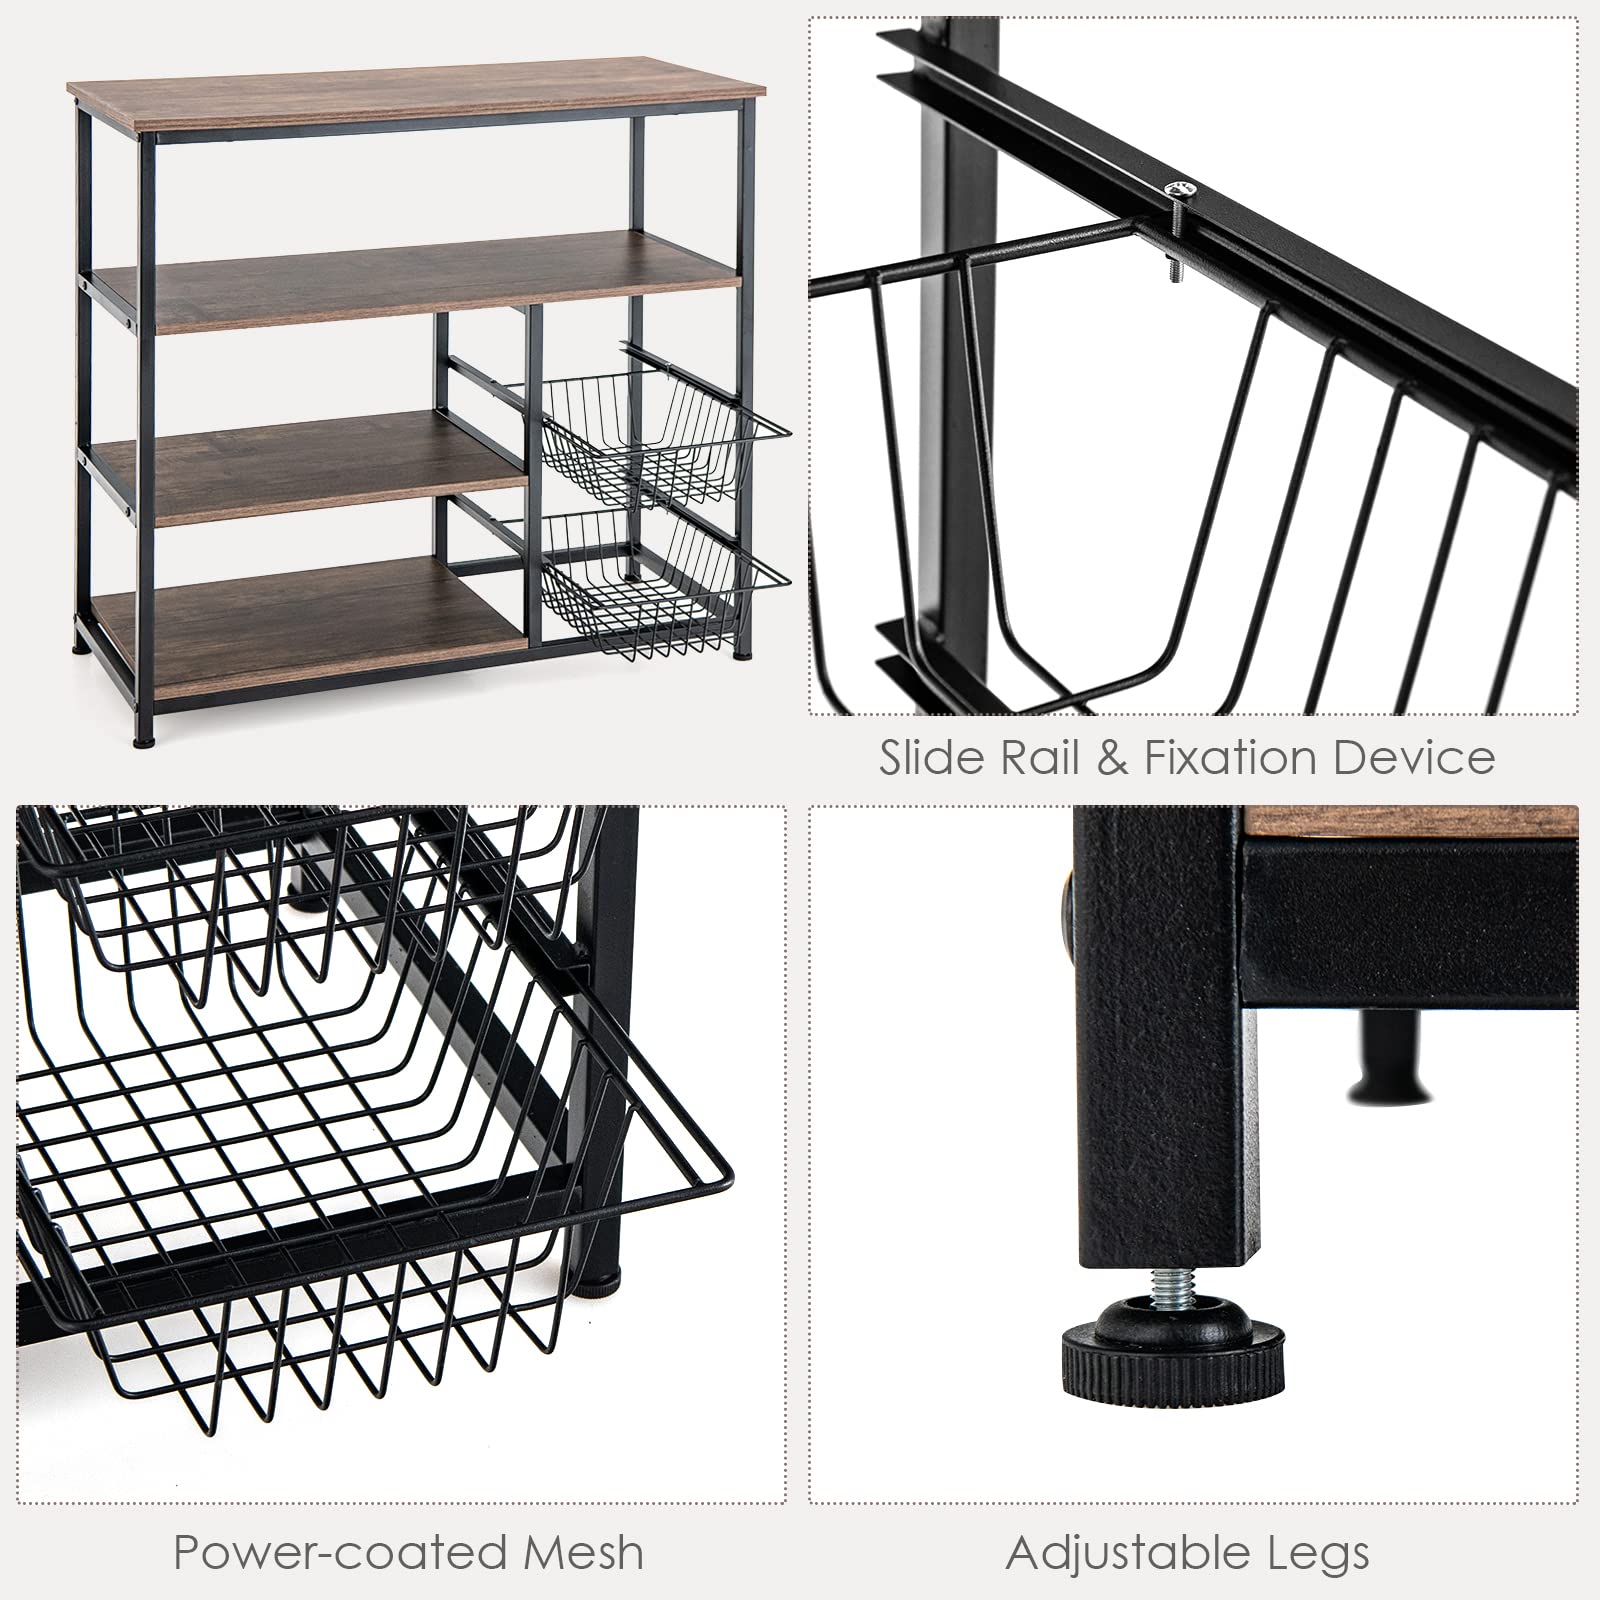 Giantex Kitchen Baker Rack, Industrial Coffee Station with 2 Wire Baskets, 3-Tier Wood Shelves(Brown & Black)